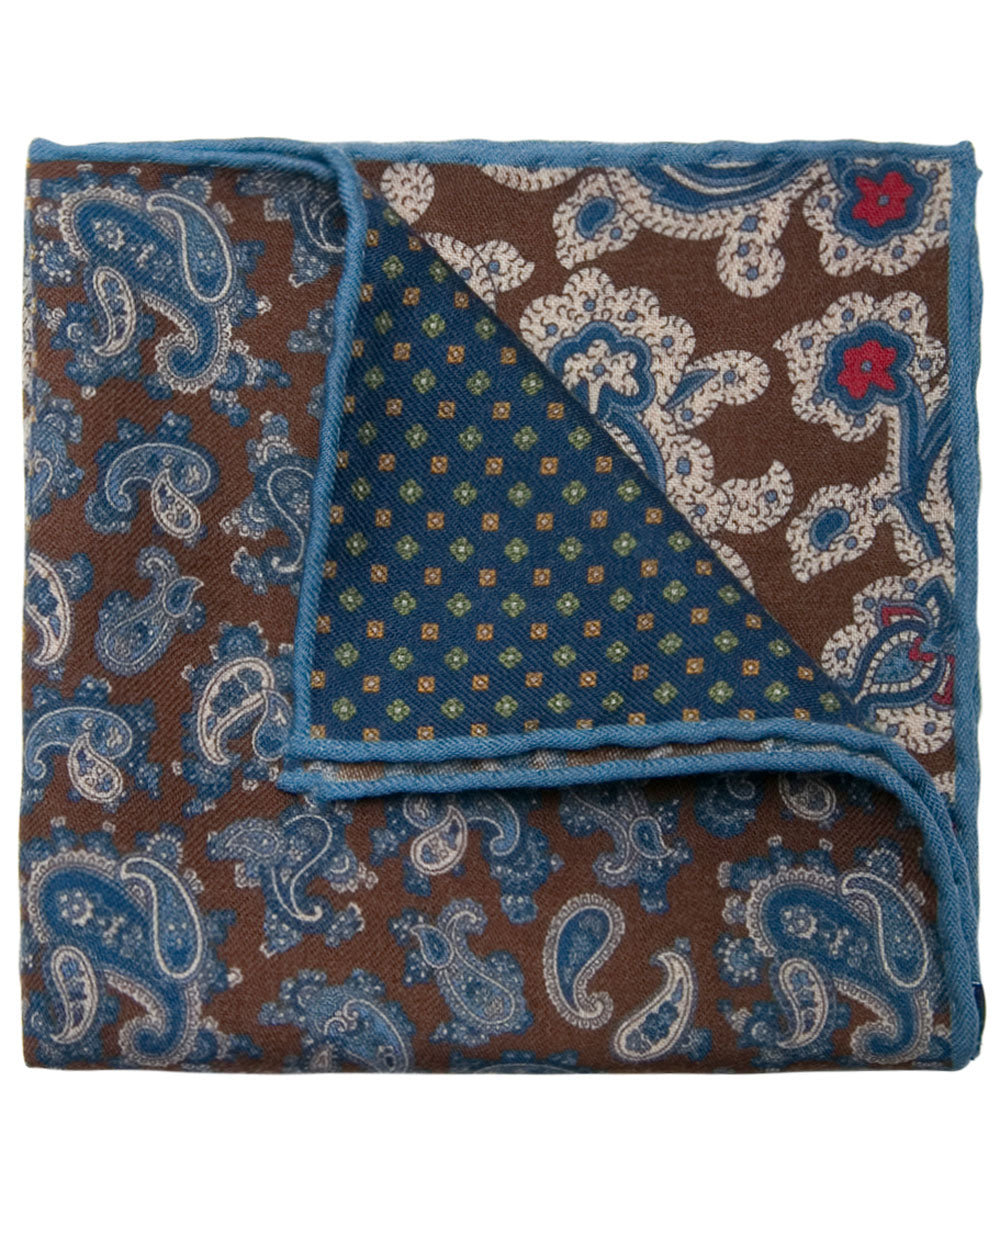 Brown and Blue Wool Melange Neat Pocket Square